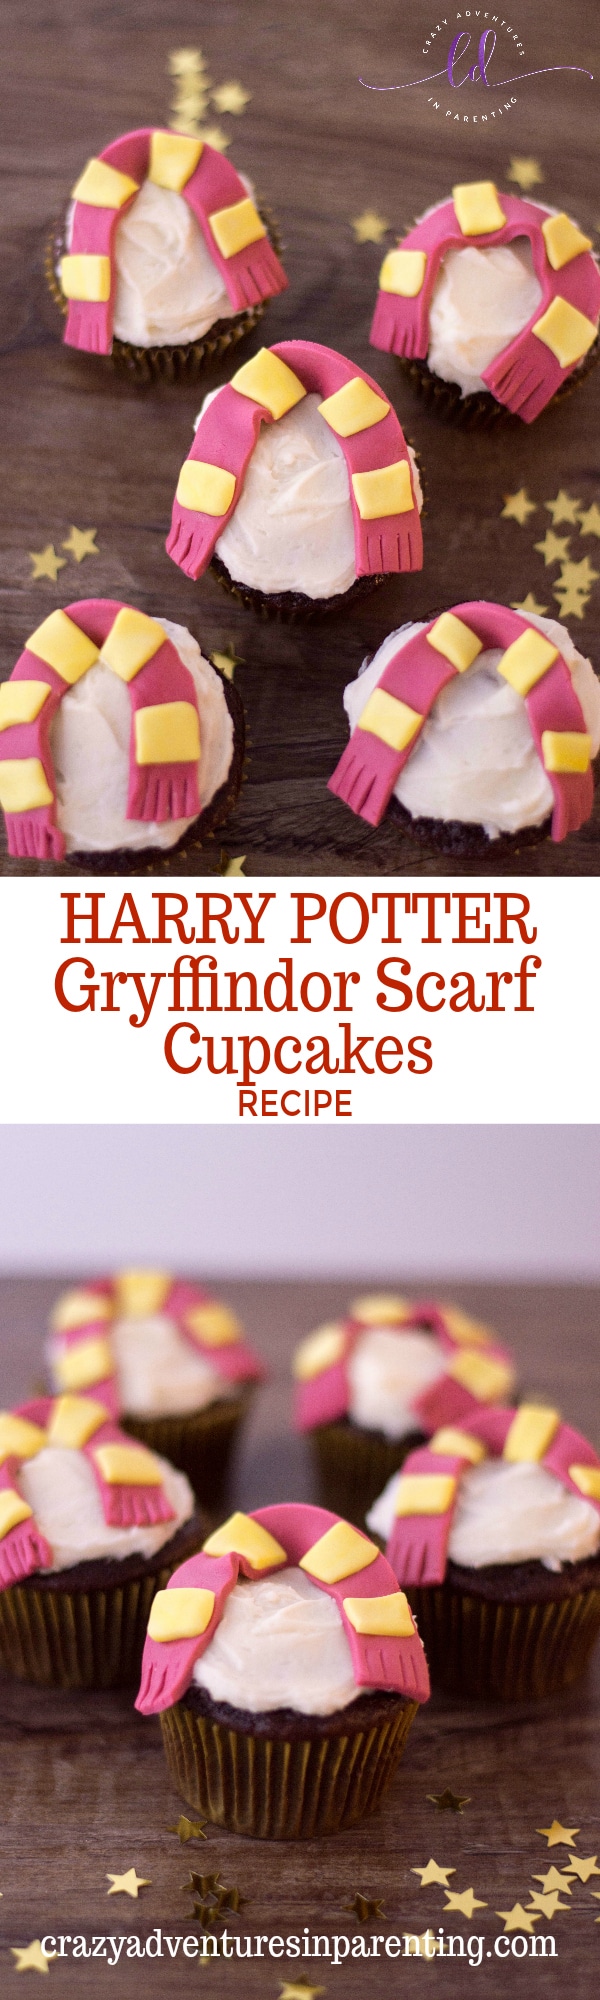 Harry Potter Gryffindor Scarf Cupcakes Recipe